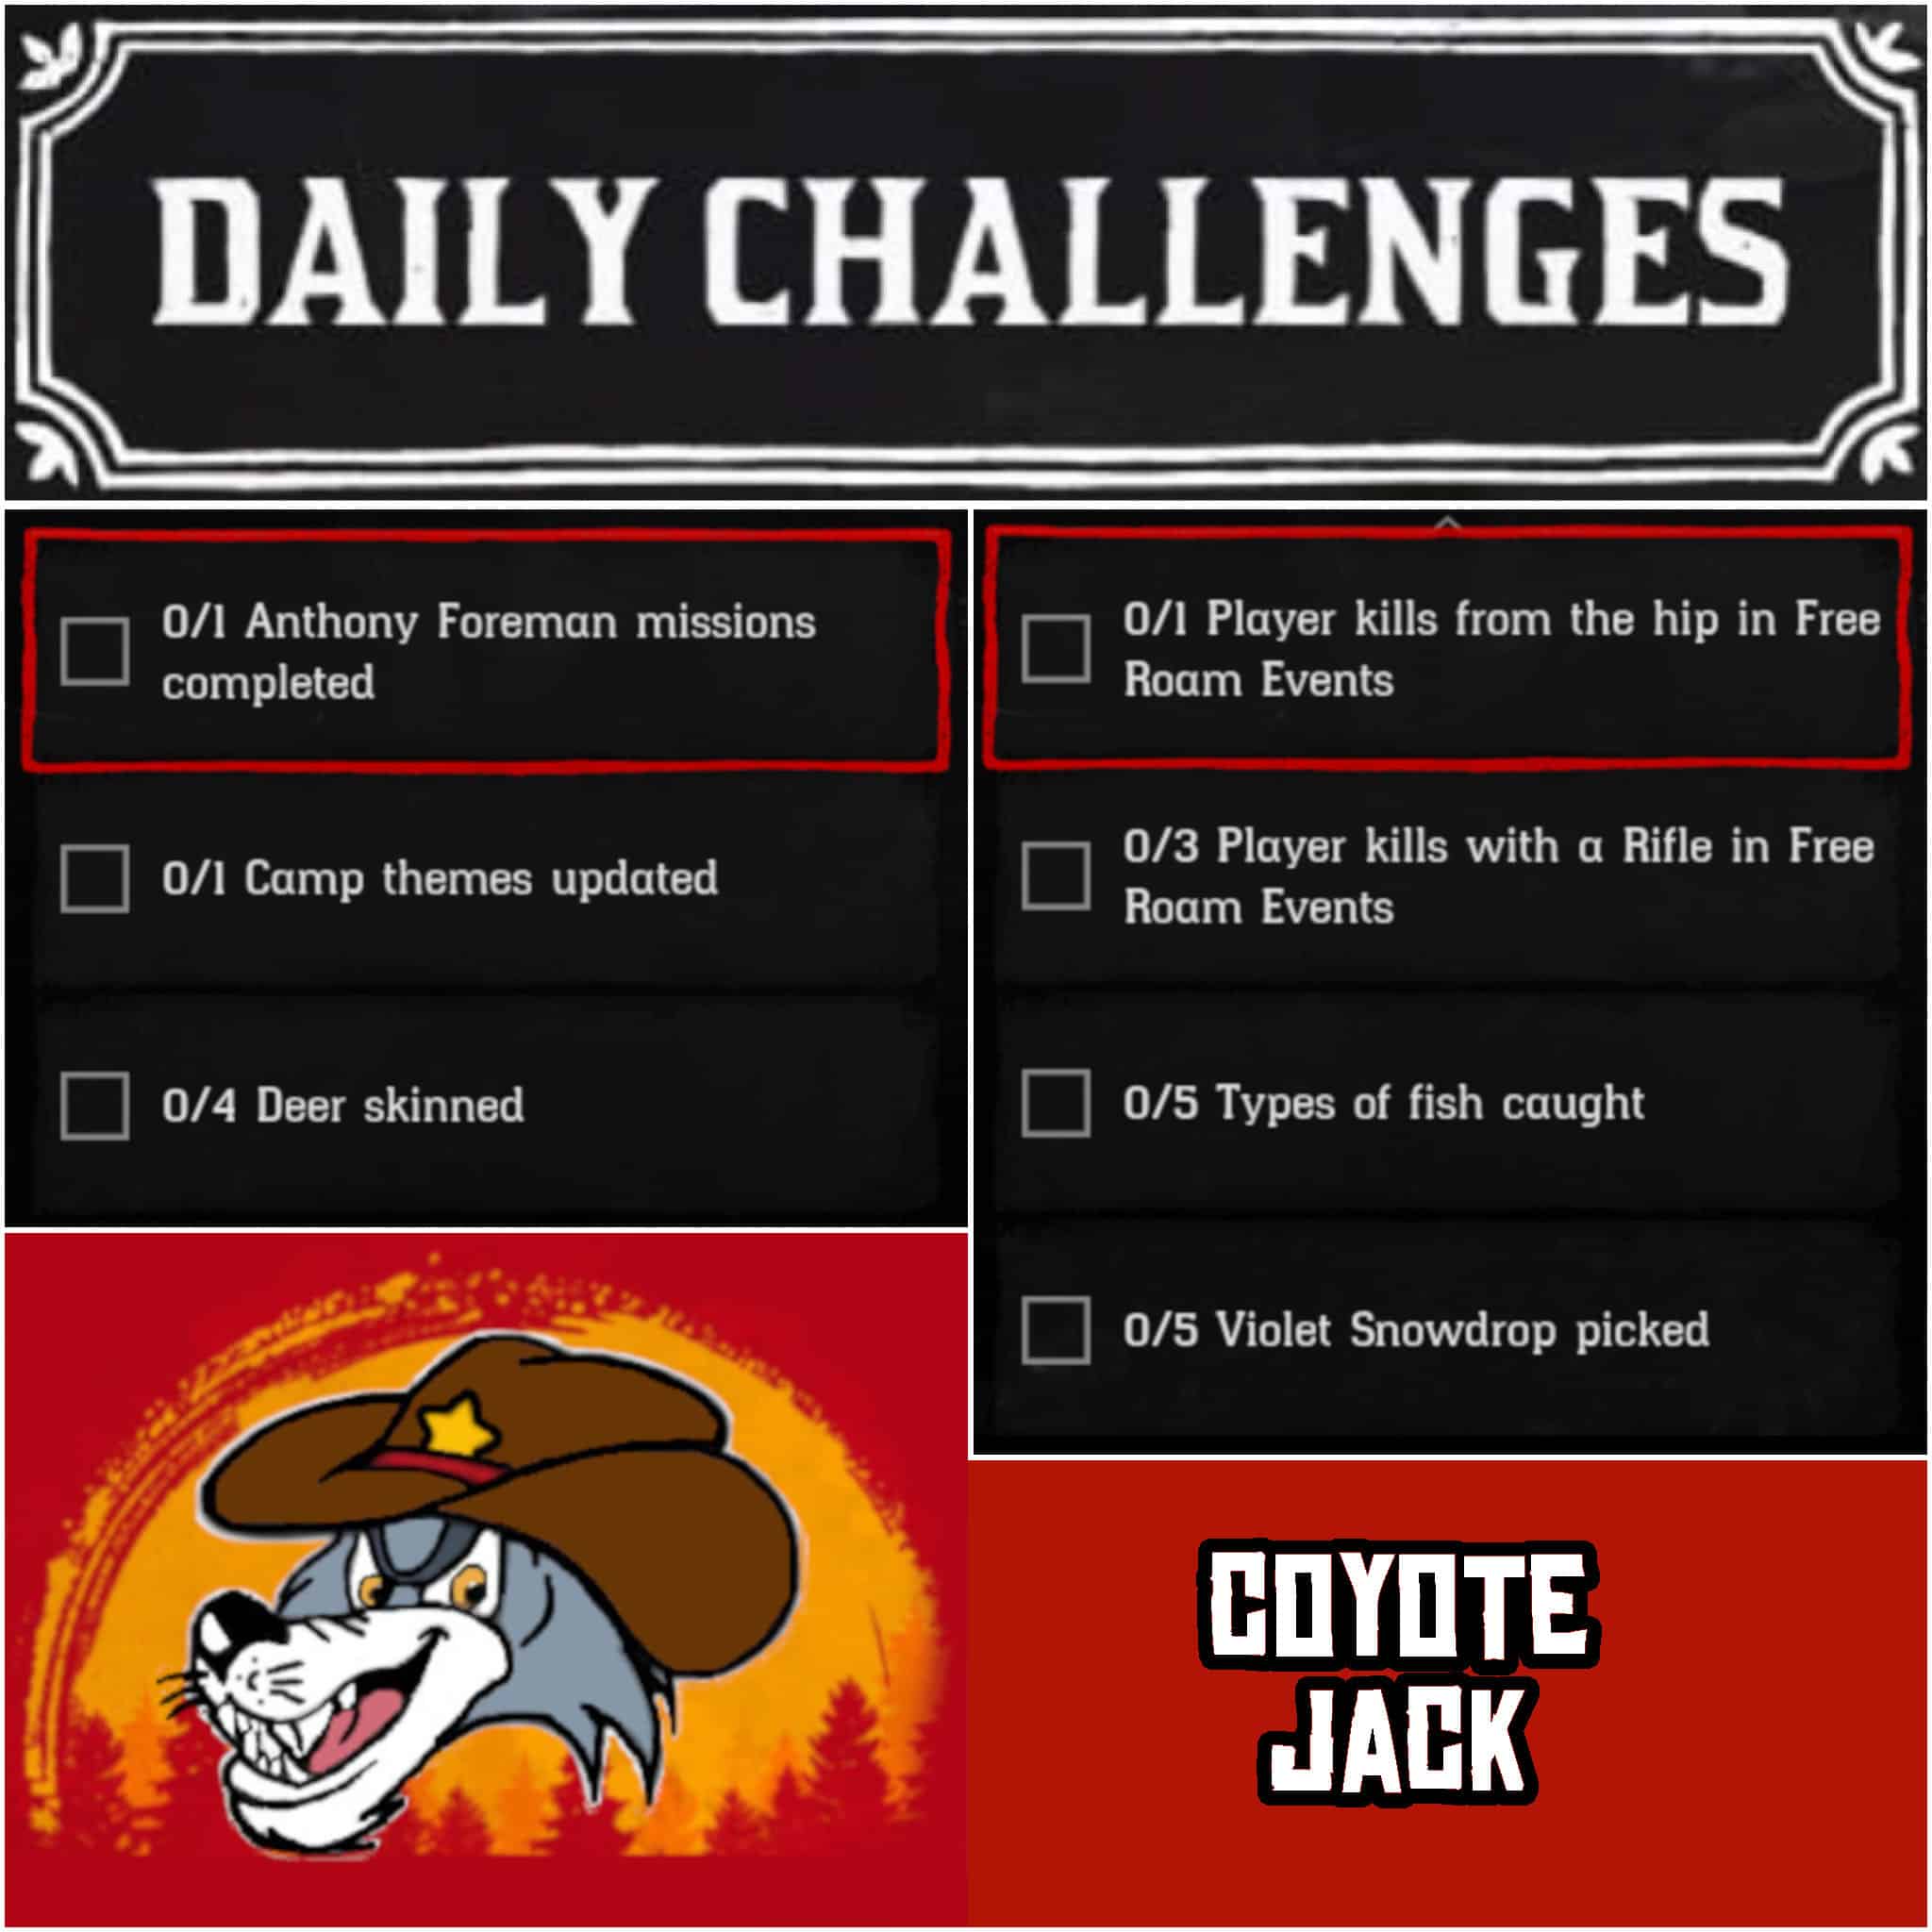 You are currently viewing Wednesday 23 December Daily Challenges